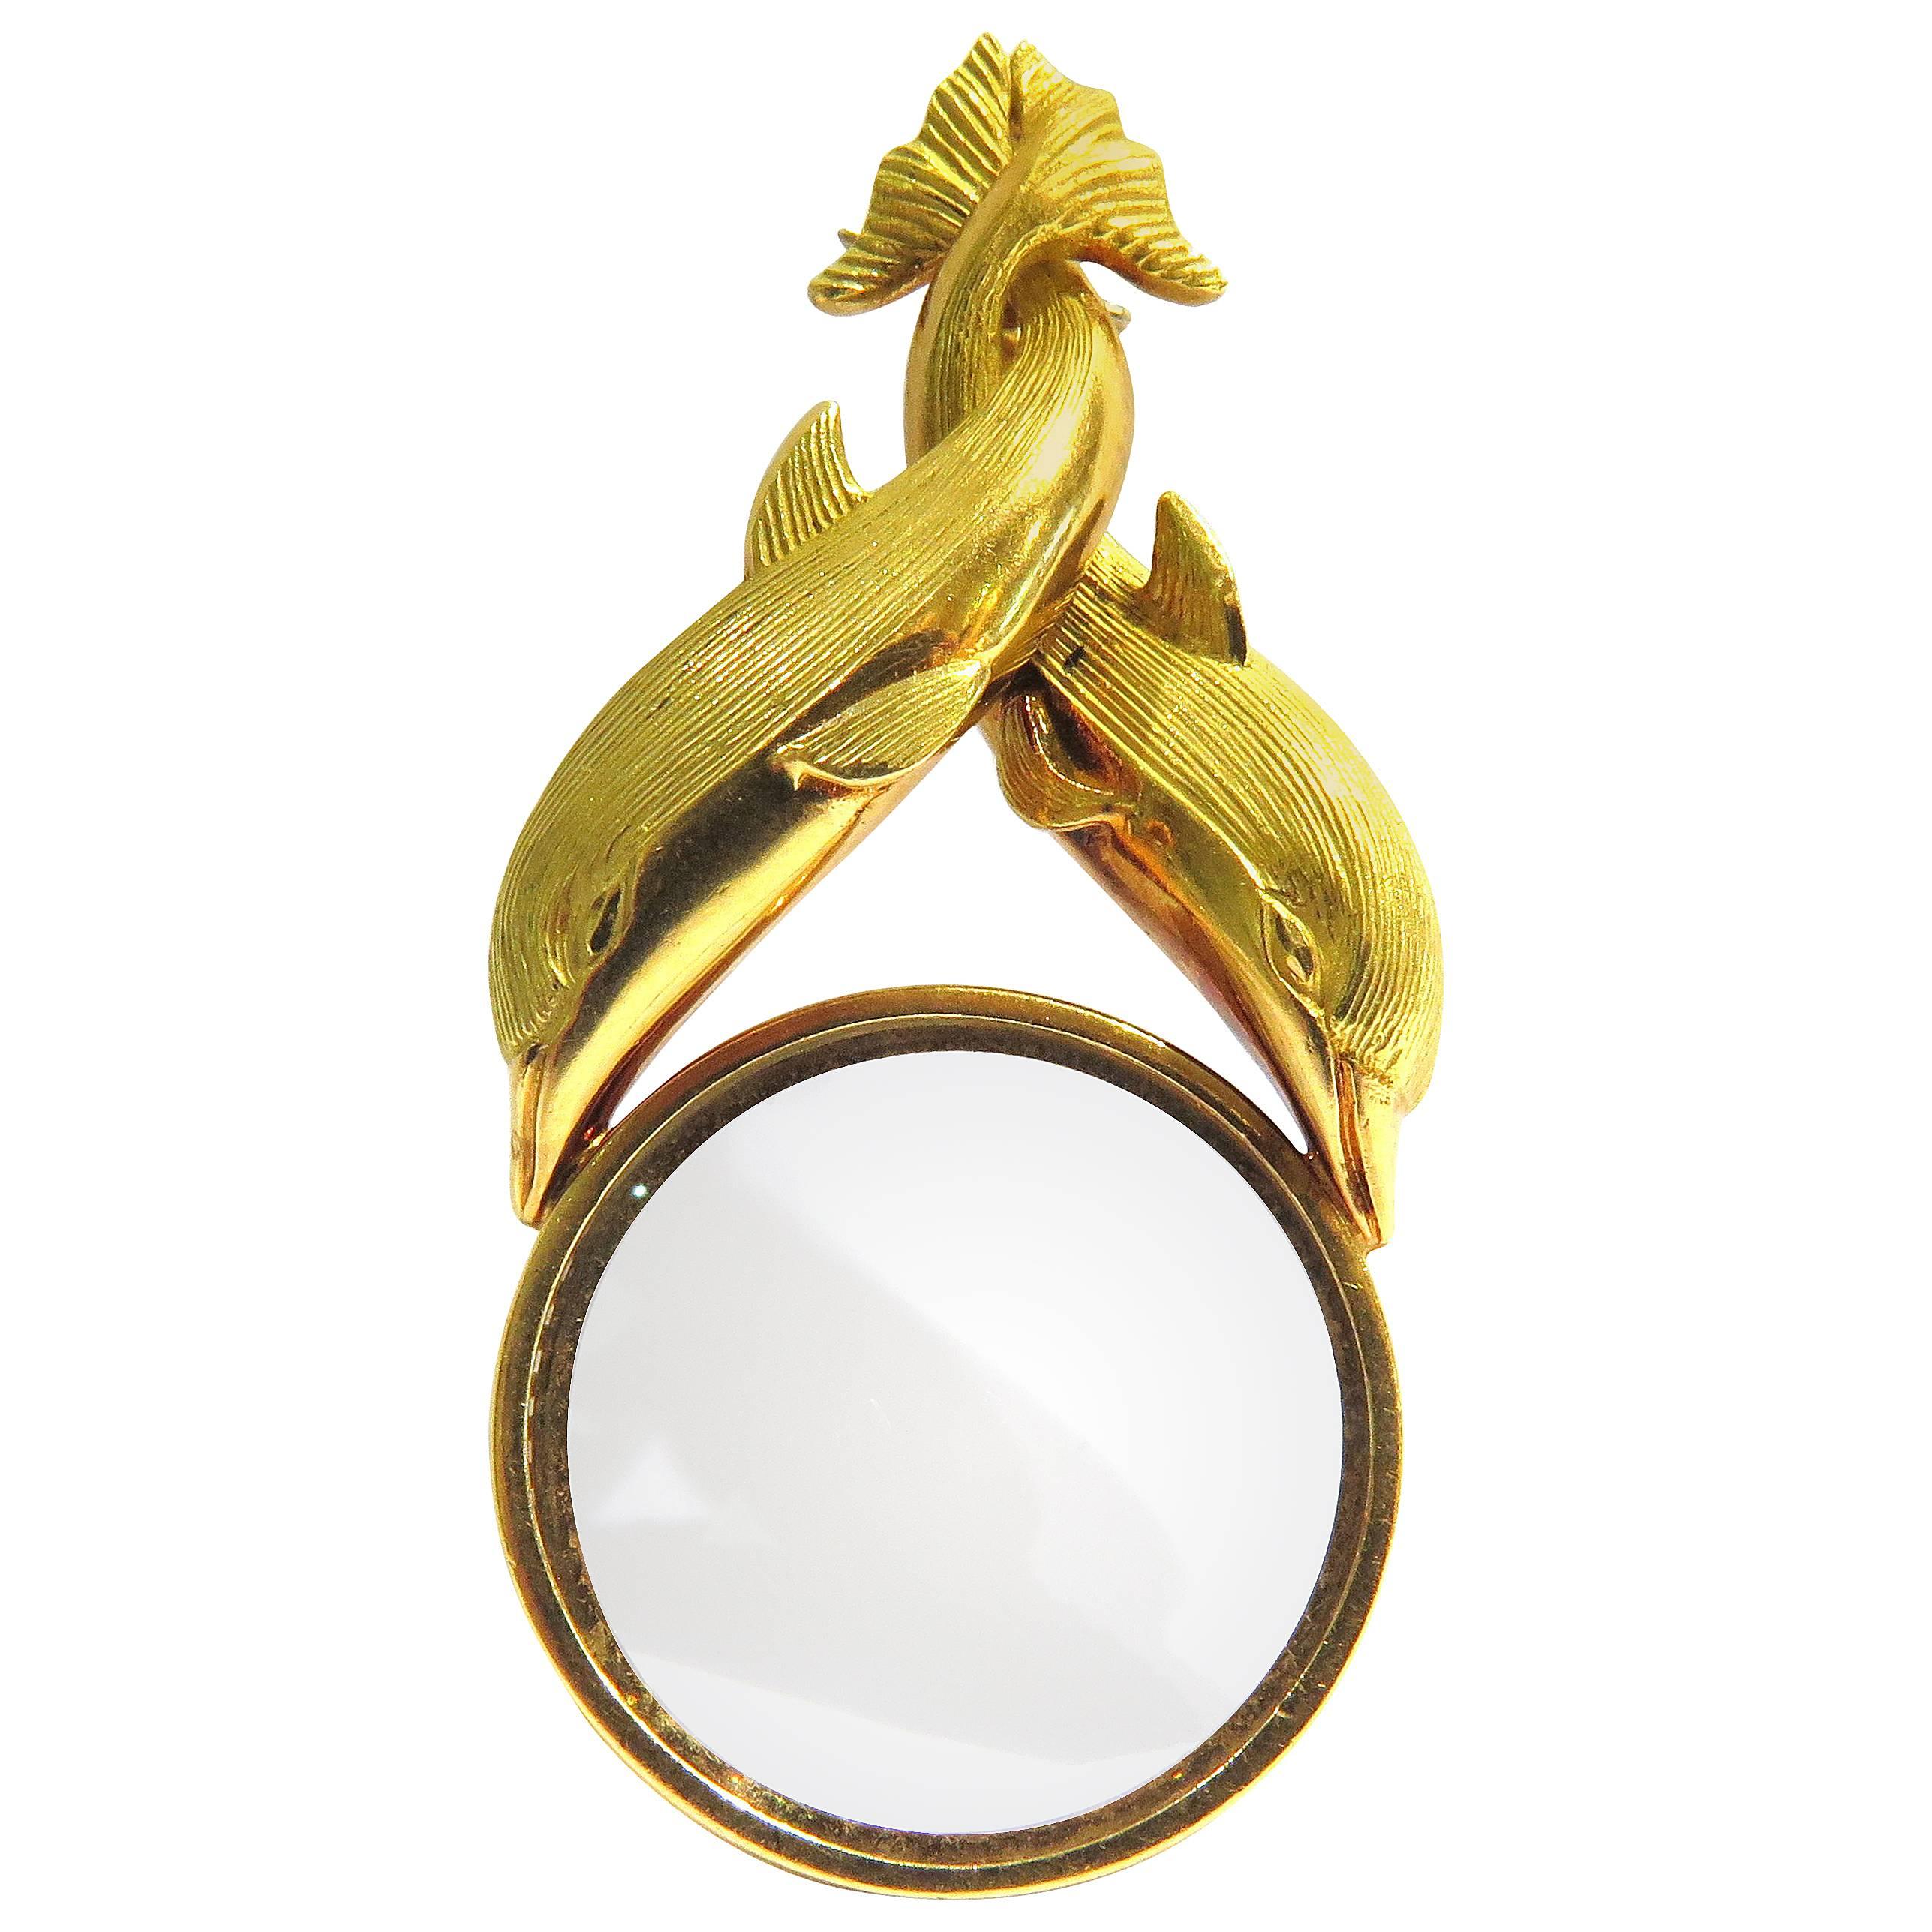 French Entwined Dolphins Magnifying Glass Gold Charm Pendant